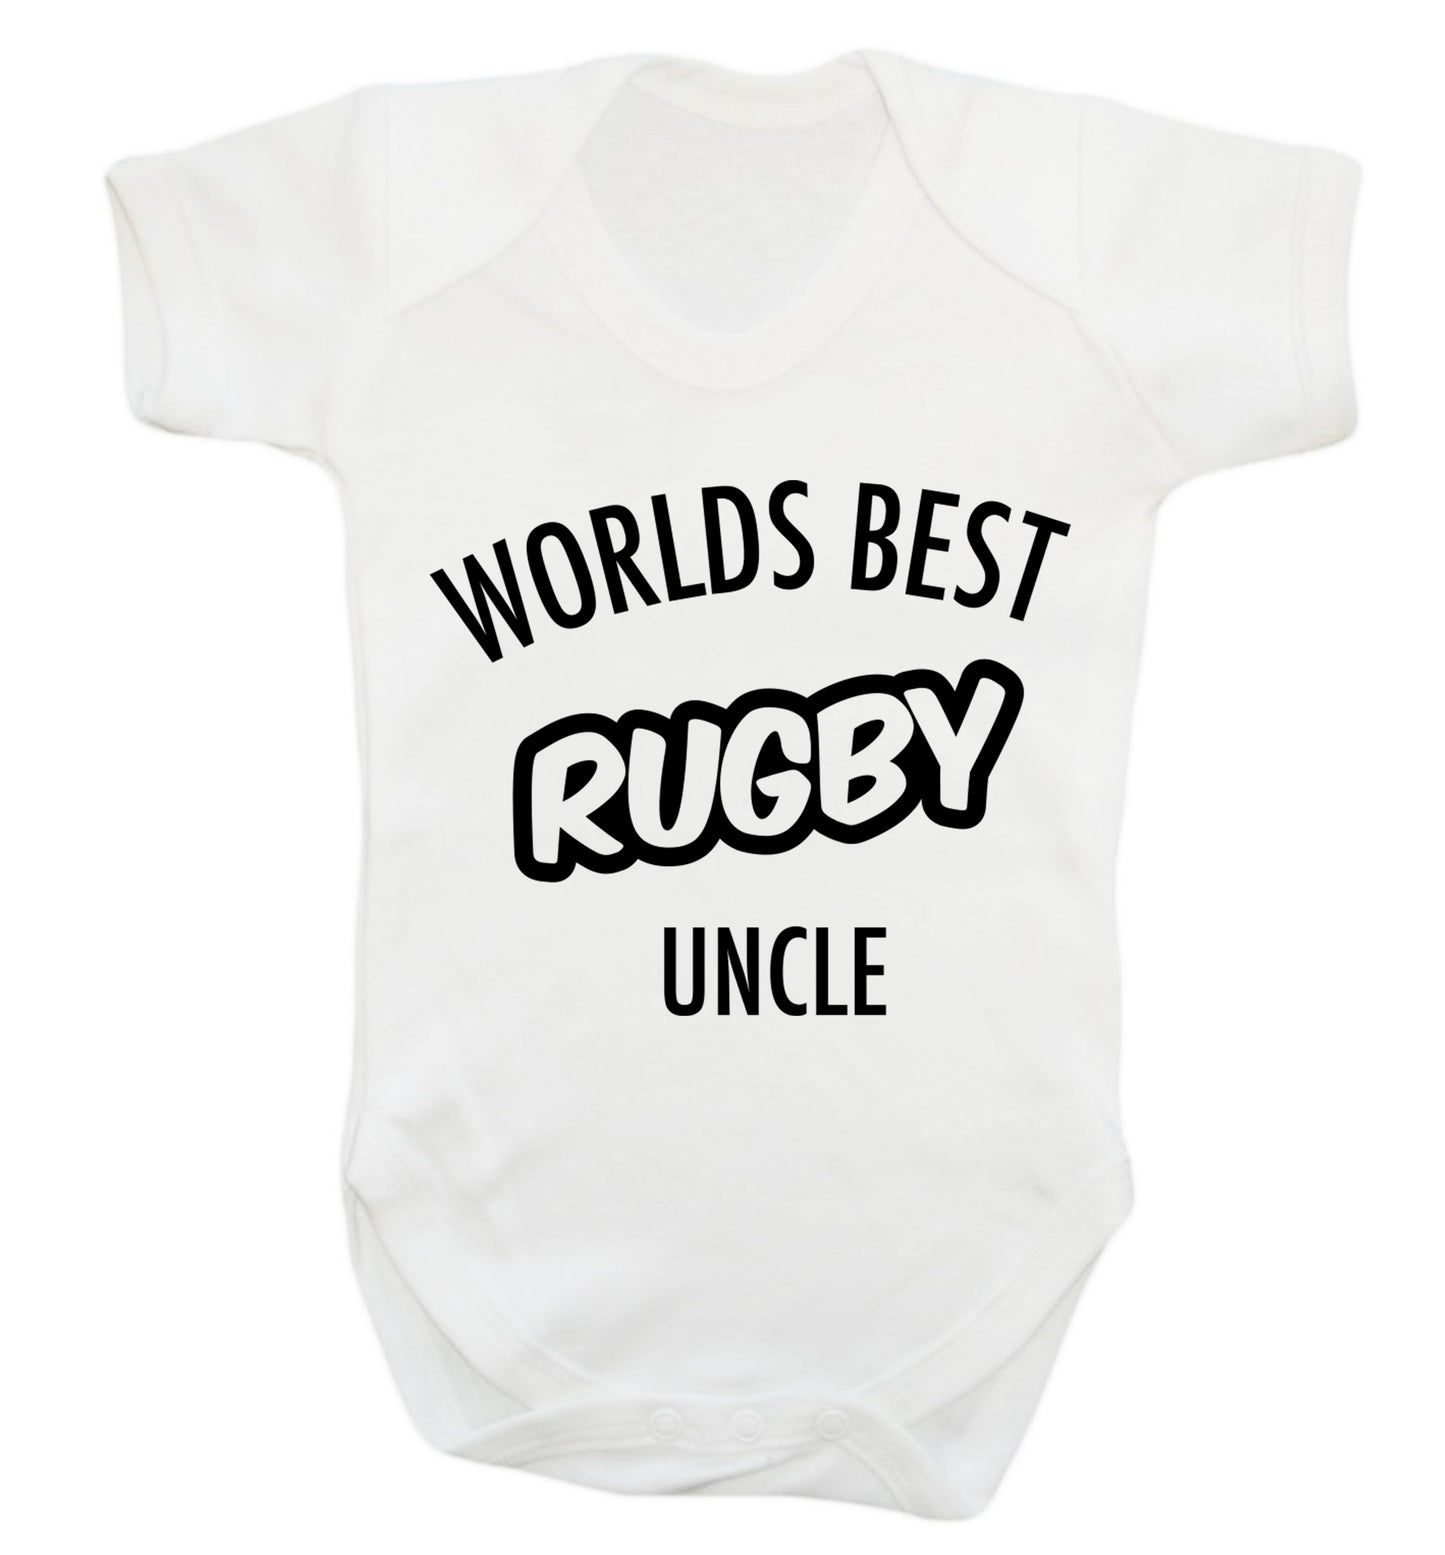 Worlds best rugby uncle Baby Vest white 18-24 months